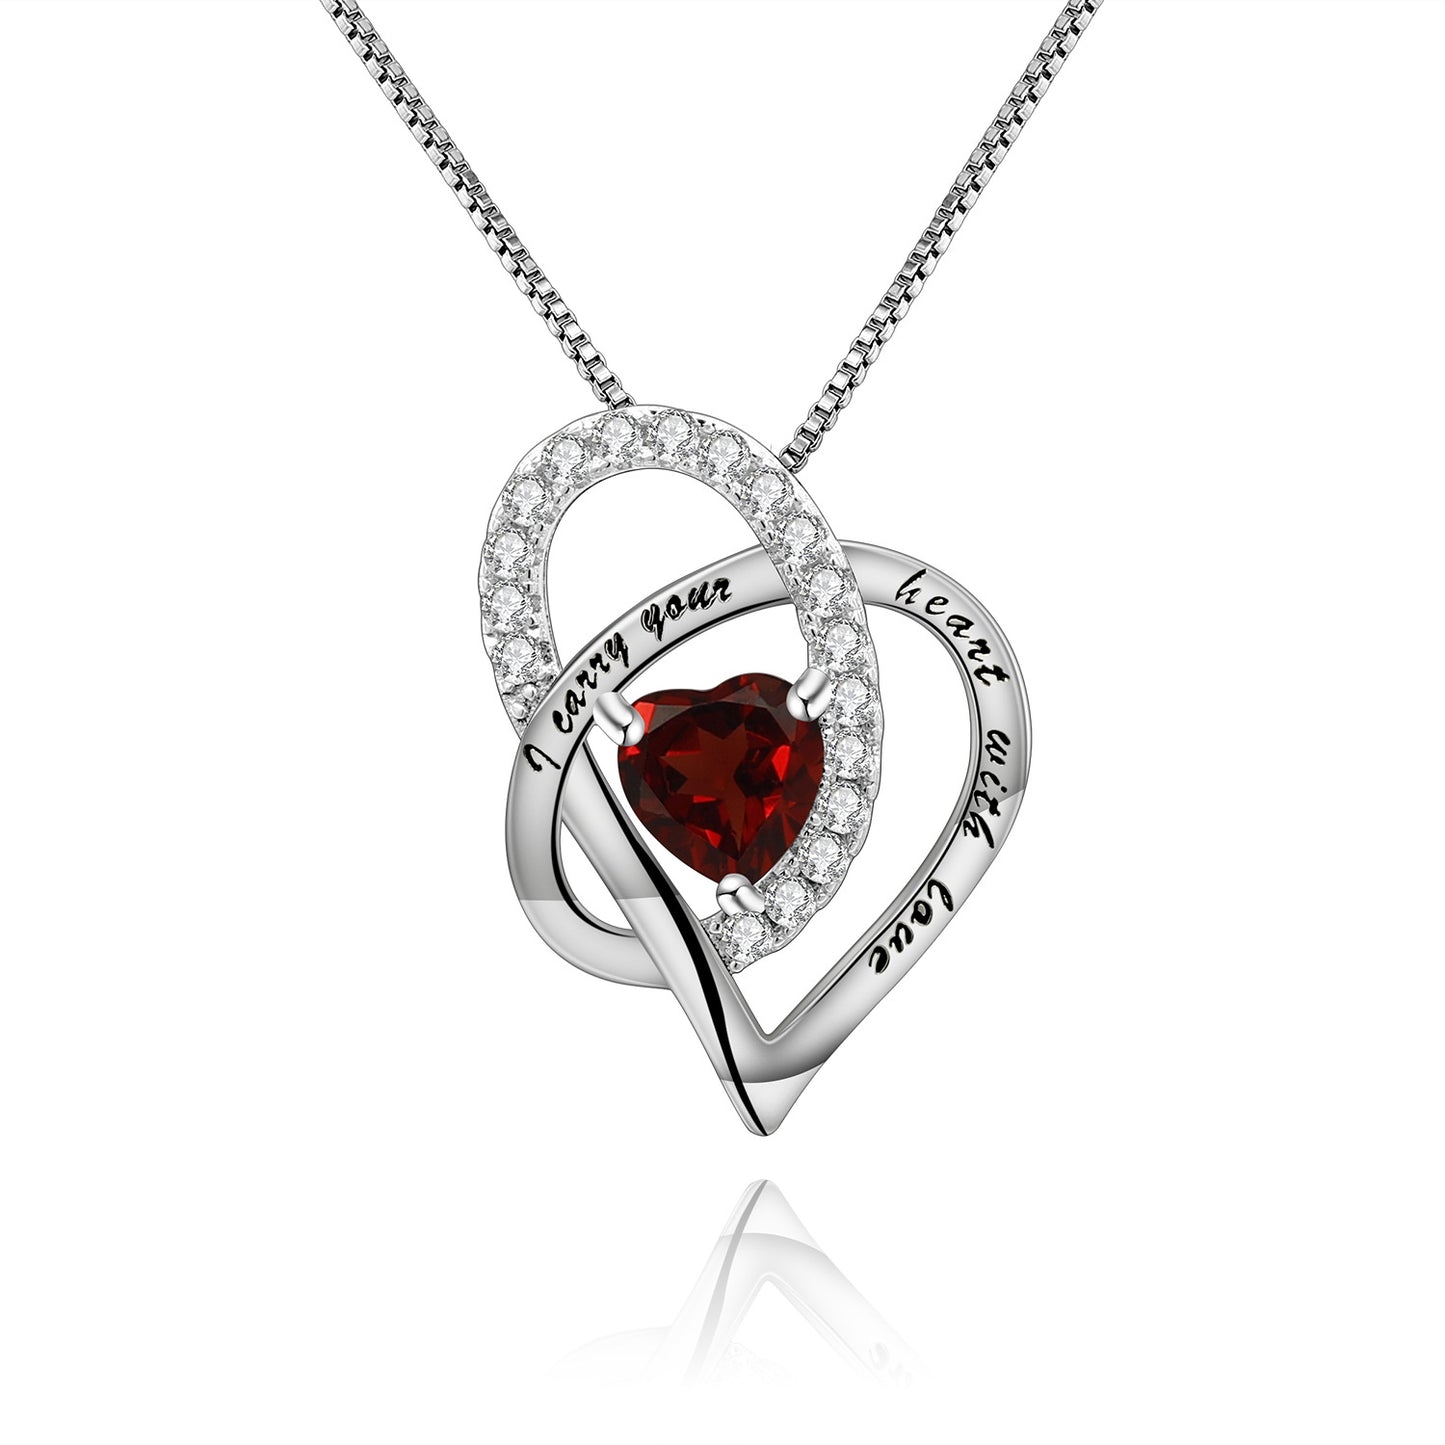 Luxury Style Interlocking Design Natural Colourful Gemstone Love Heart Pendant Silver Necklace for Women